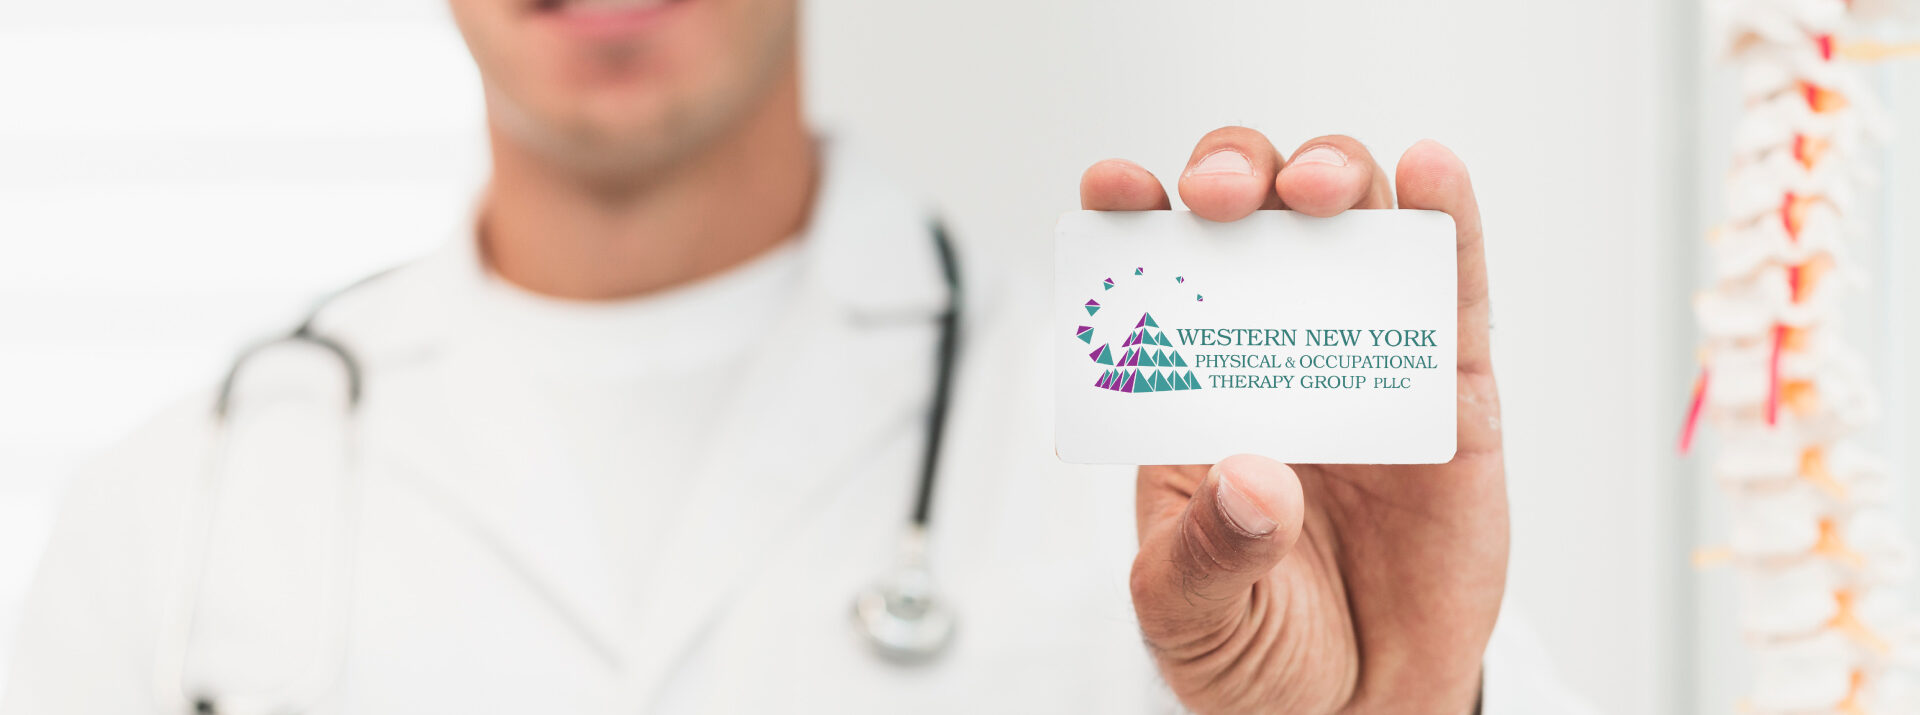 western new york physical & occupational therapy group